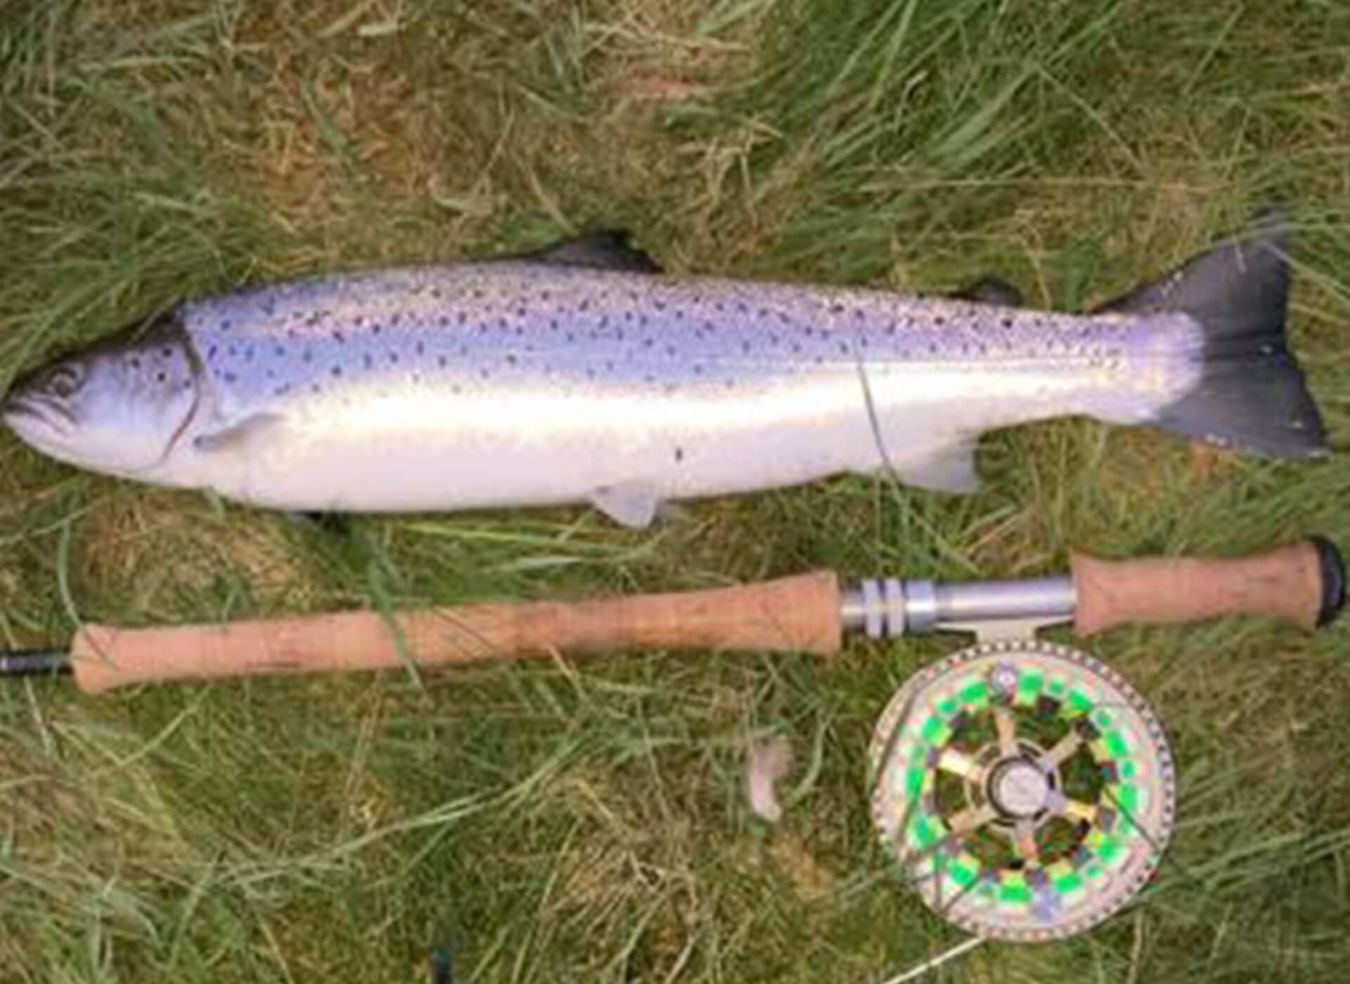 Caught Sea Trout lying on the grass alongside the rod and reel